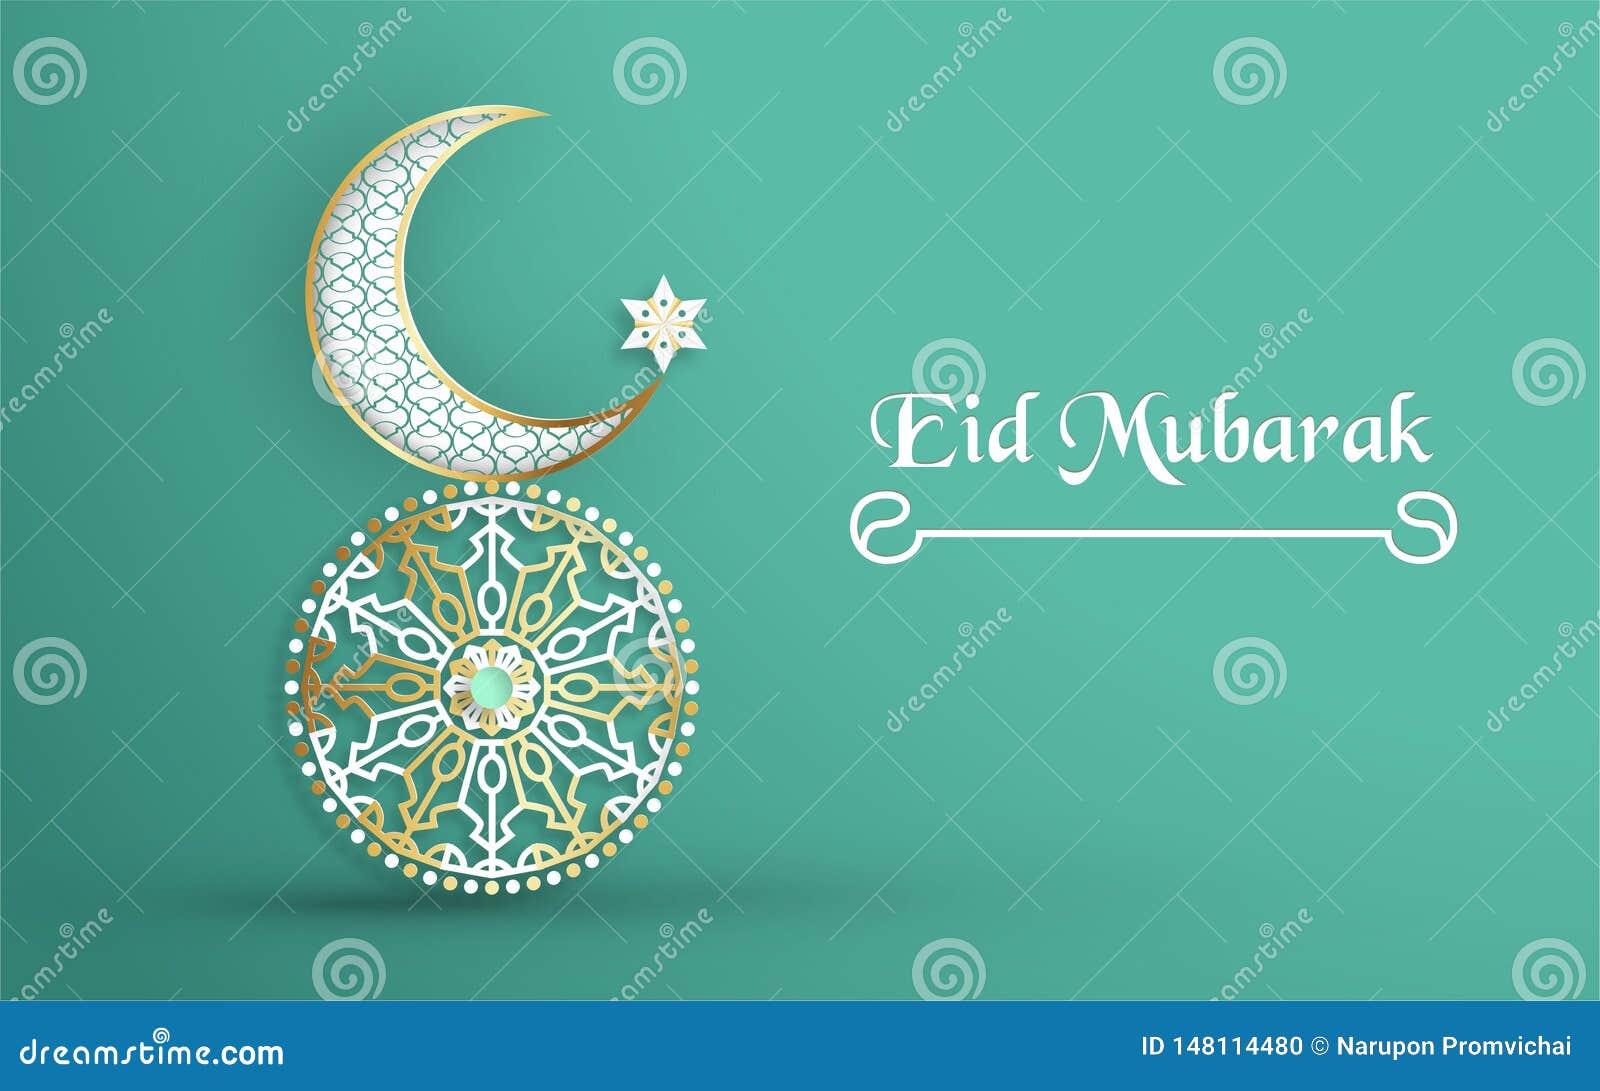 Template for Eid Mubarak with Green and Gold Color Tone. 3D Vector ...